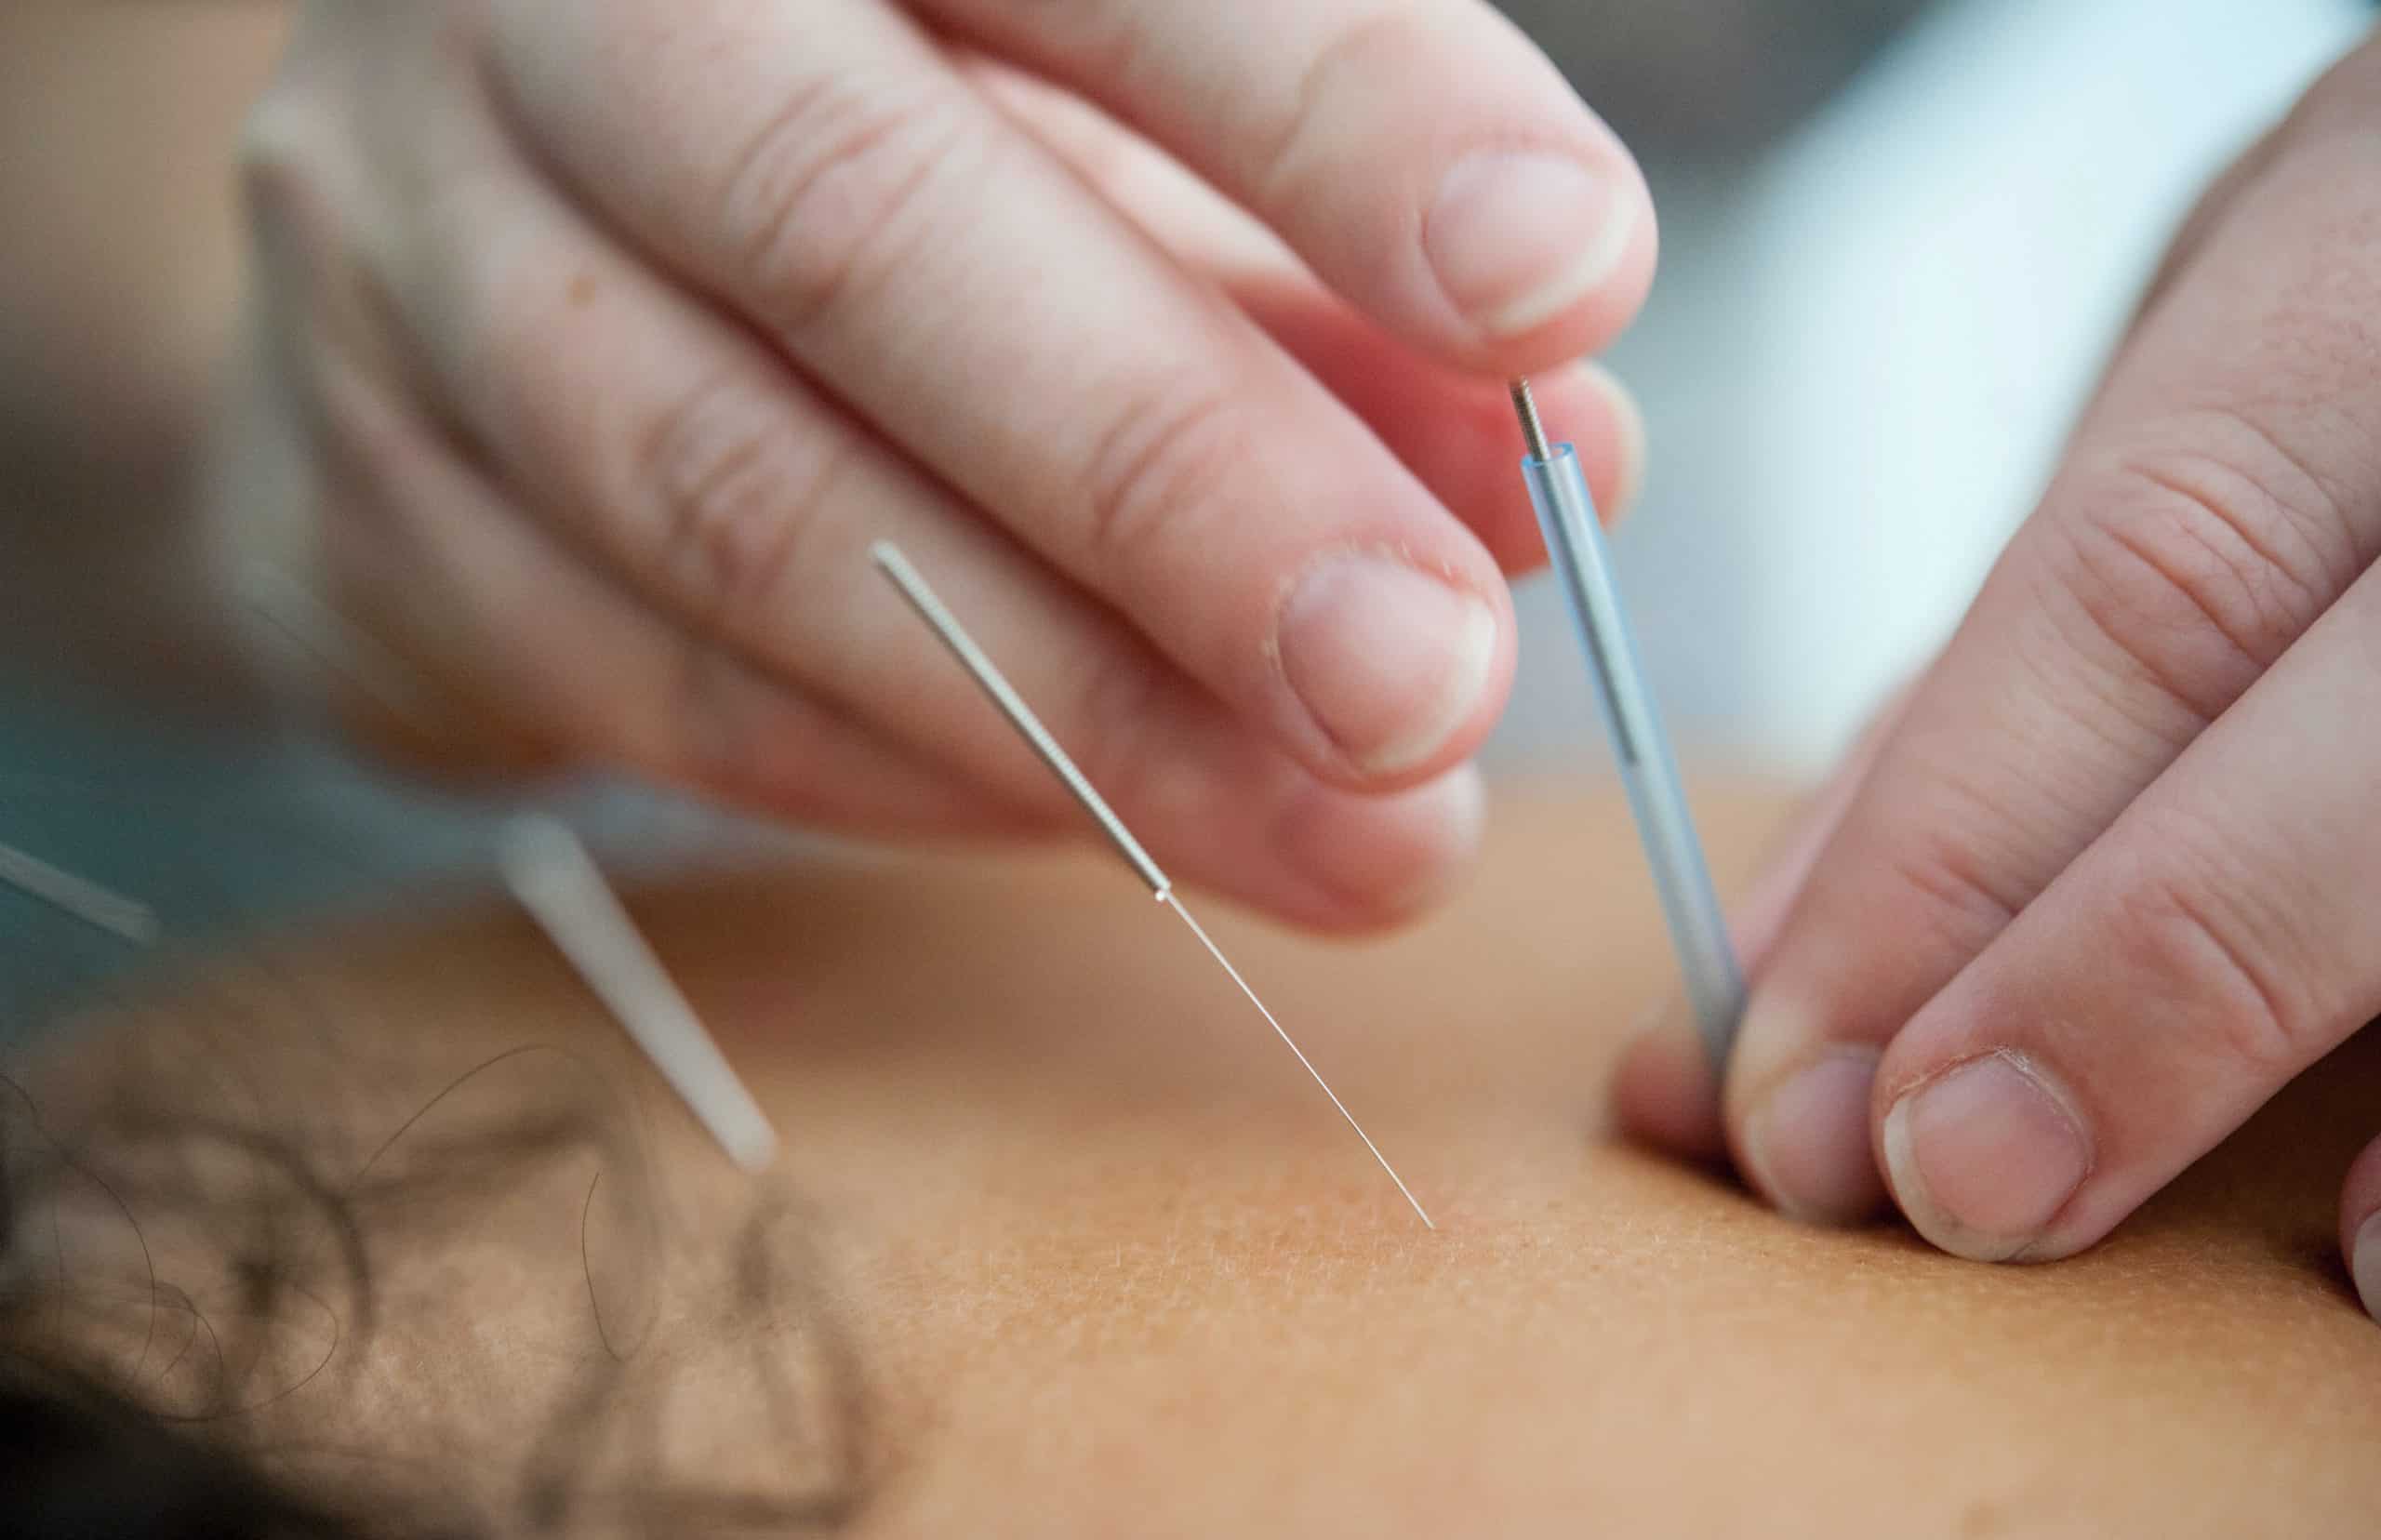 Image of acupuncture needles being inserted in someone's back